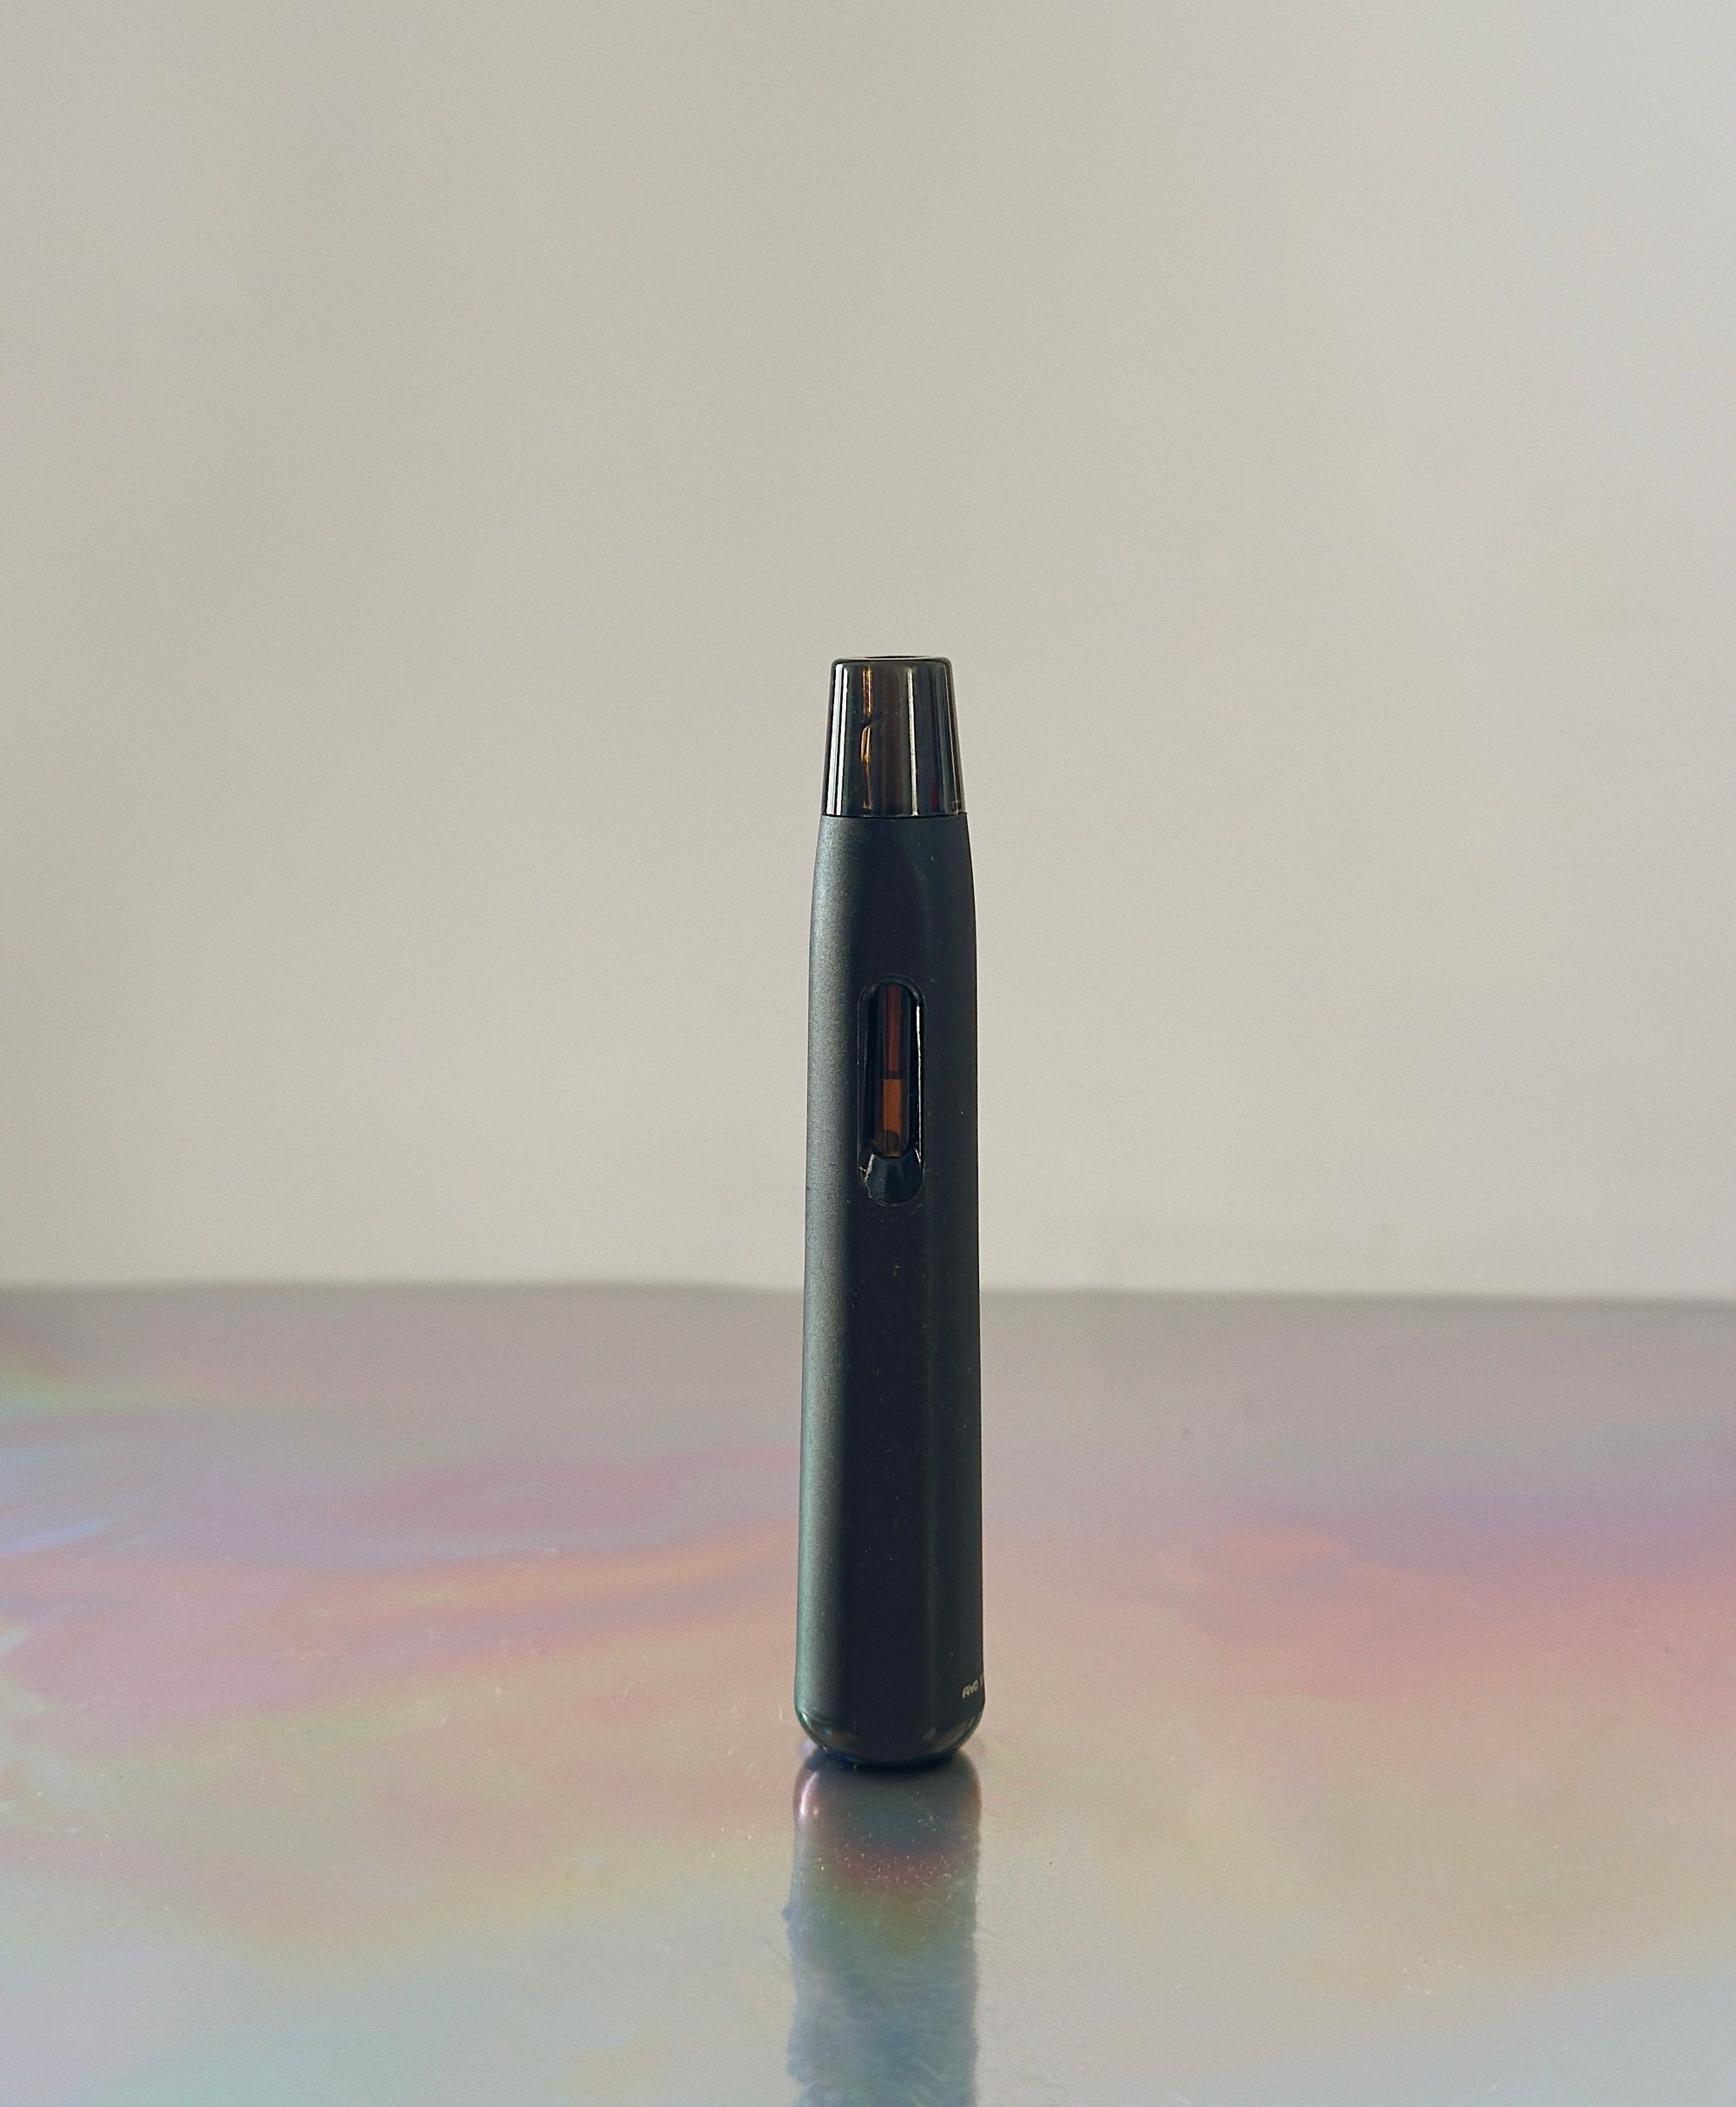 Pictured is our kanna extract vaporizer pen. Then kanna vaporizer is a slim black stick looking device. The background is grey. Made with Sceletium Tortuosum